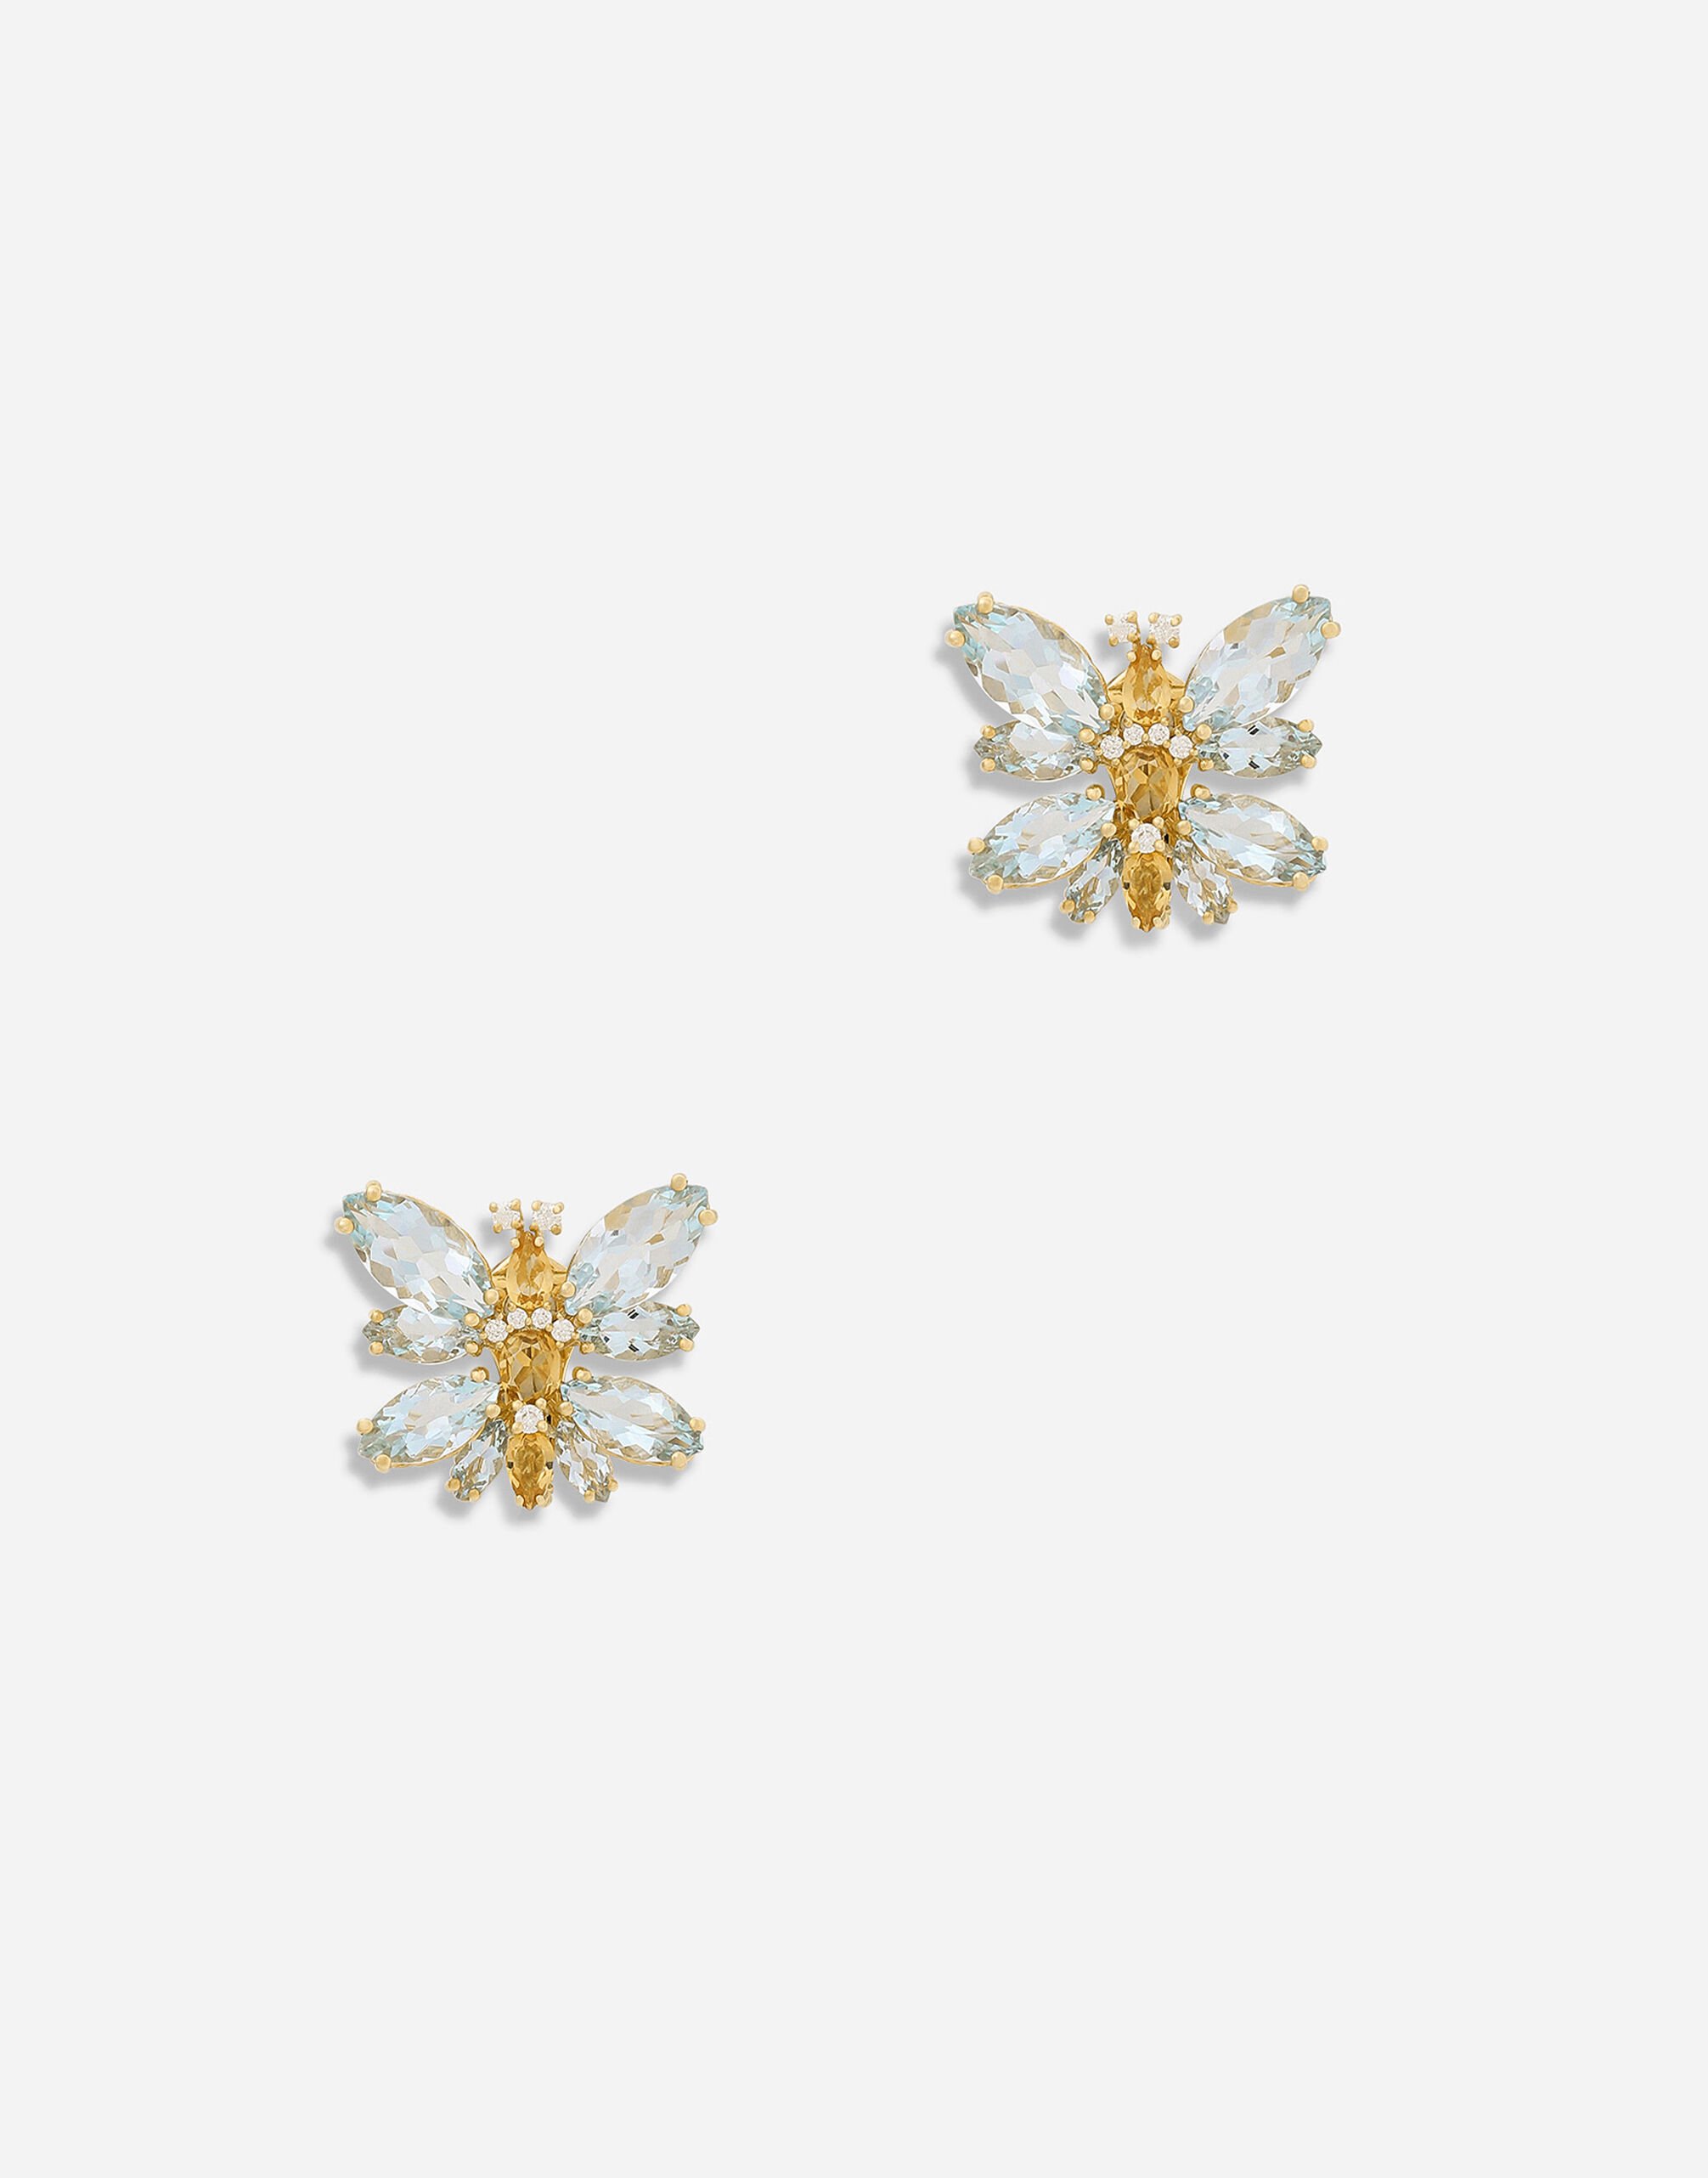 Dolce & Gabbana Spring earrings in yellow 18kt gold with aquamarine butterfly Gold WALK5GWYE01